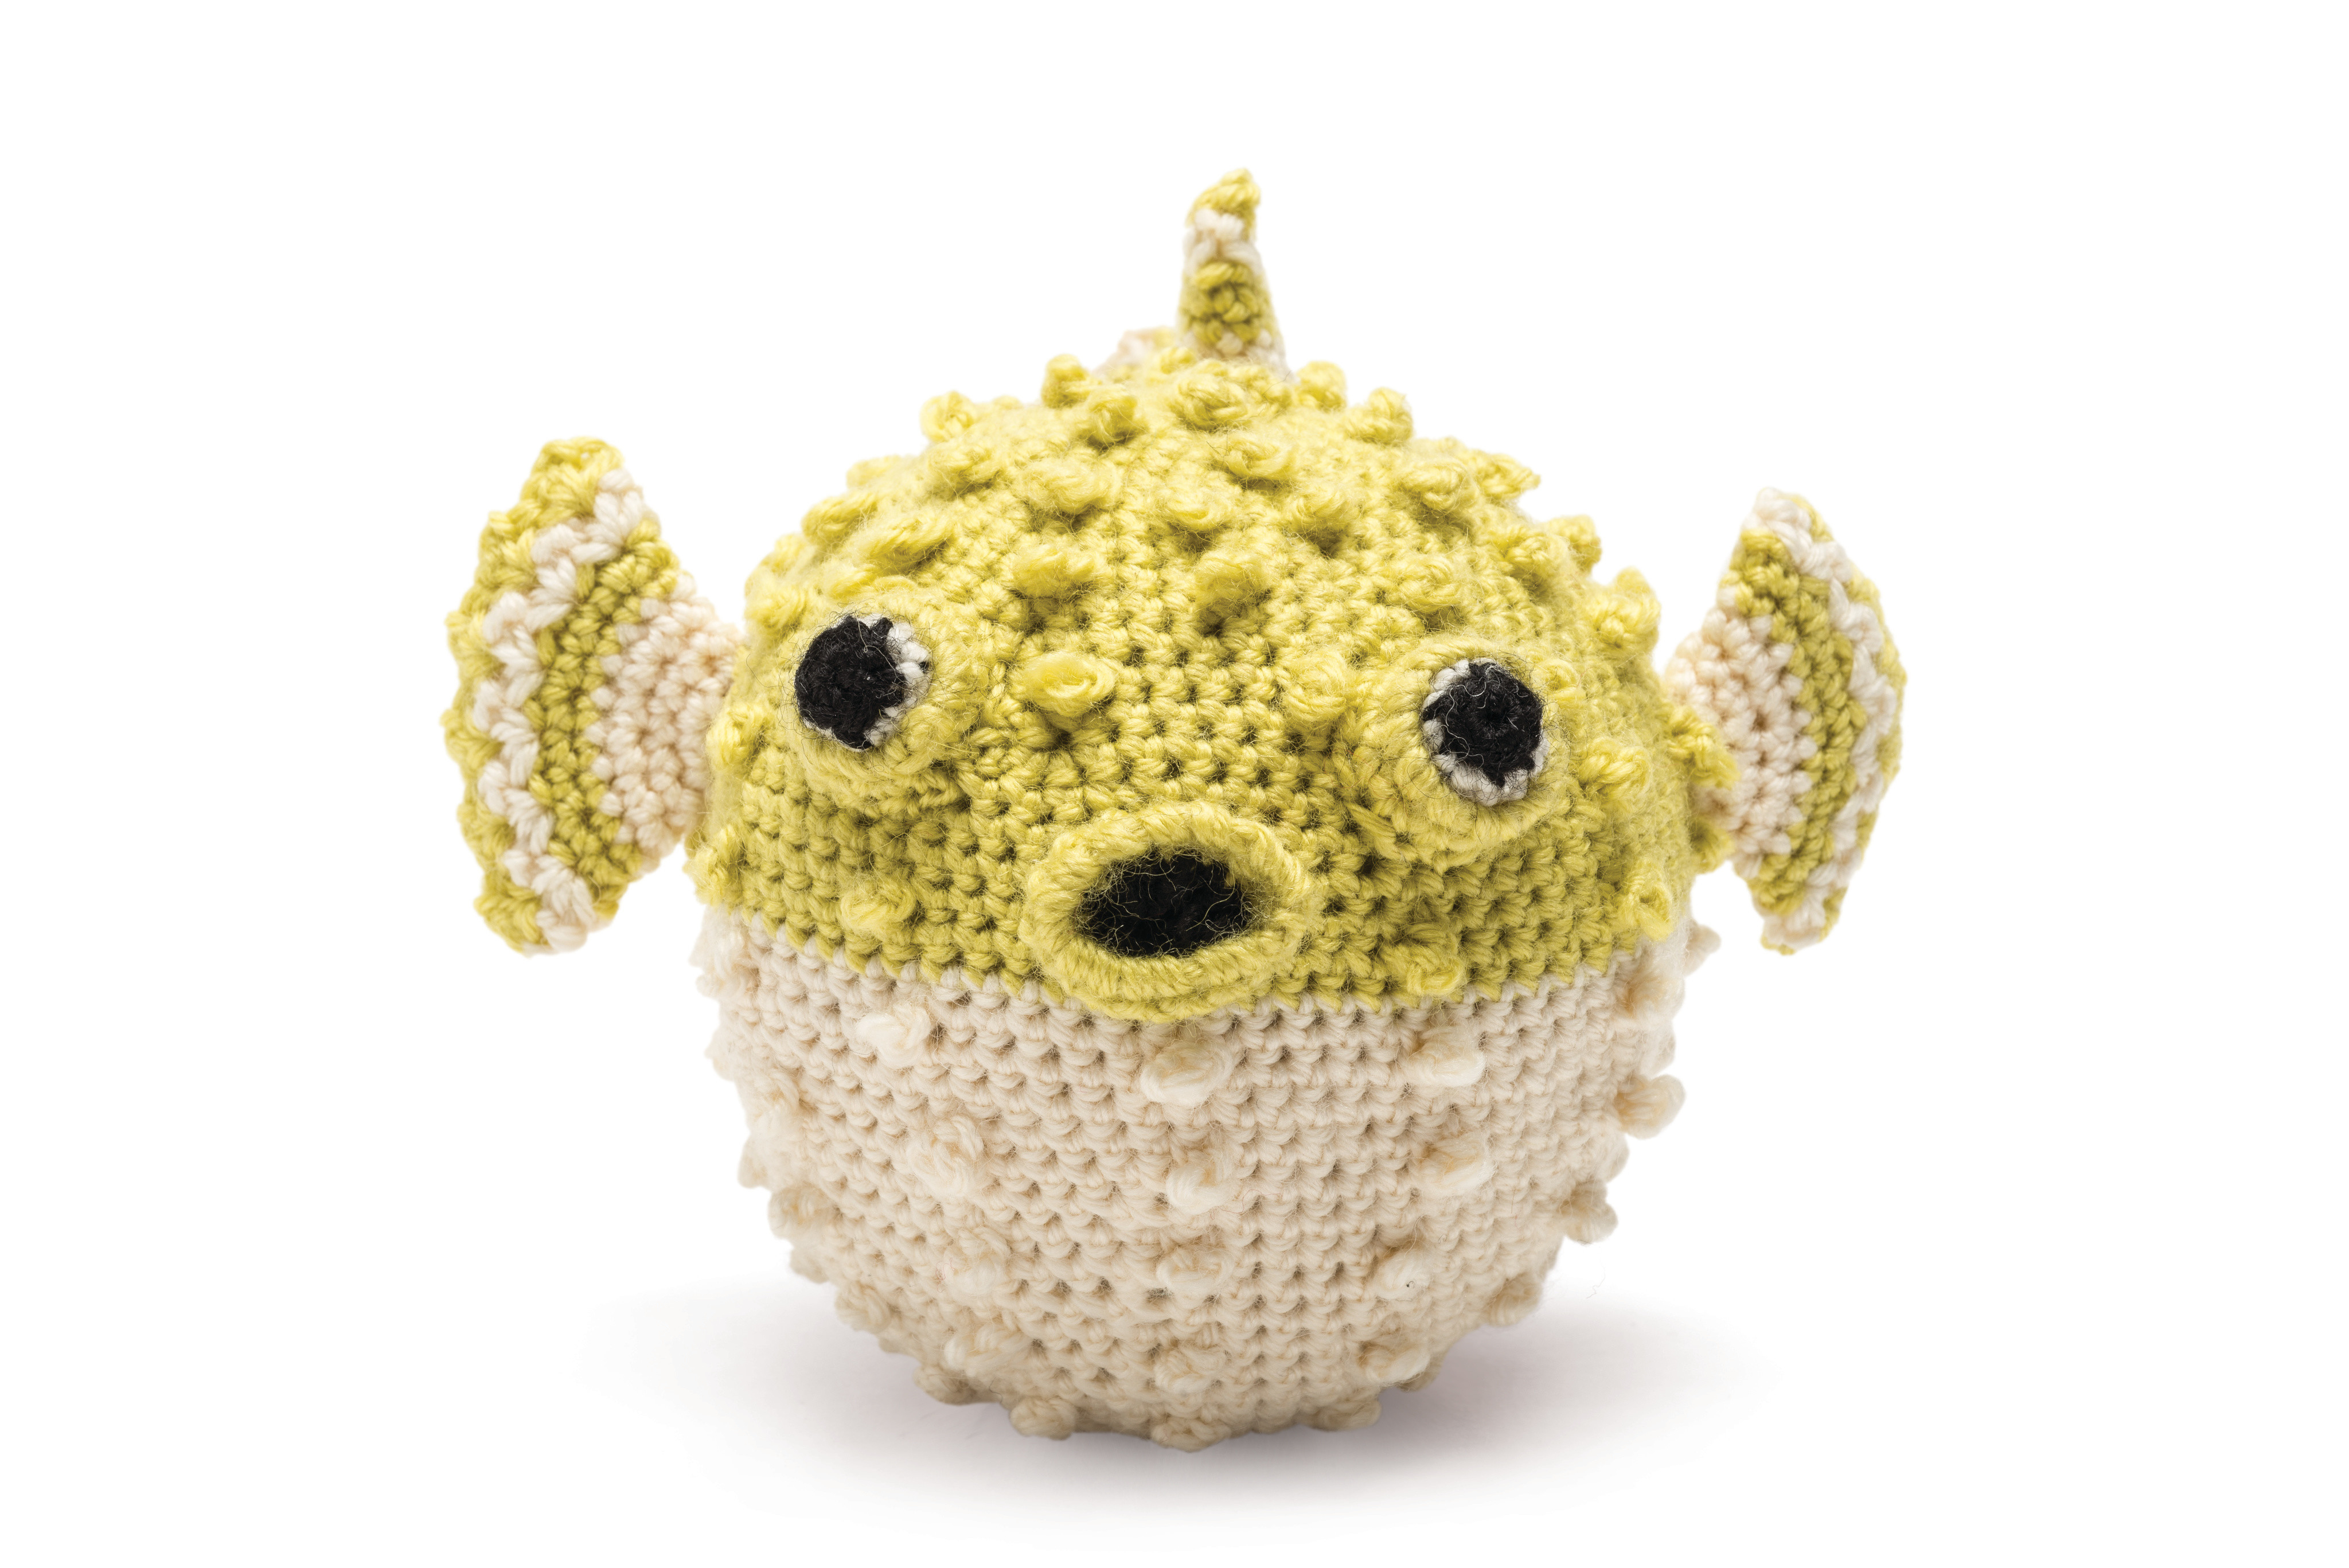 Fish Knitting Pattern Free Puffer Fish Extract From Crocheted Sea Creatures A Collection Of